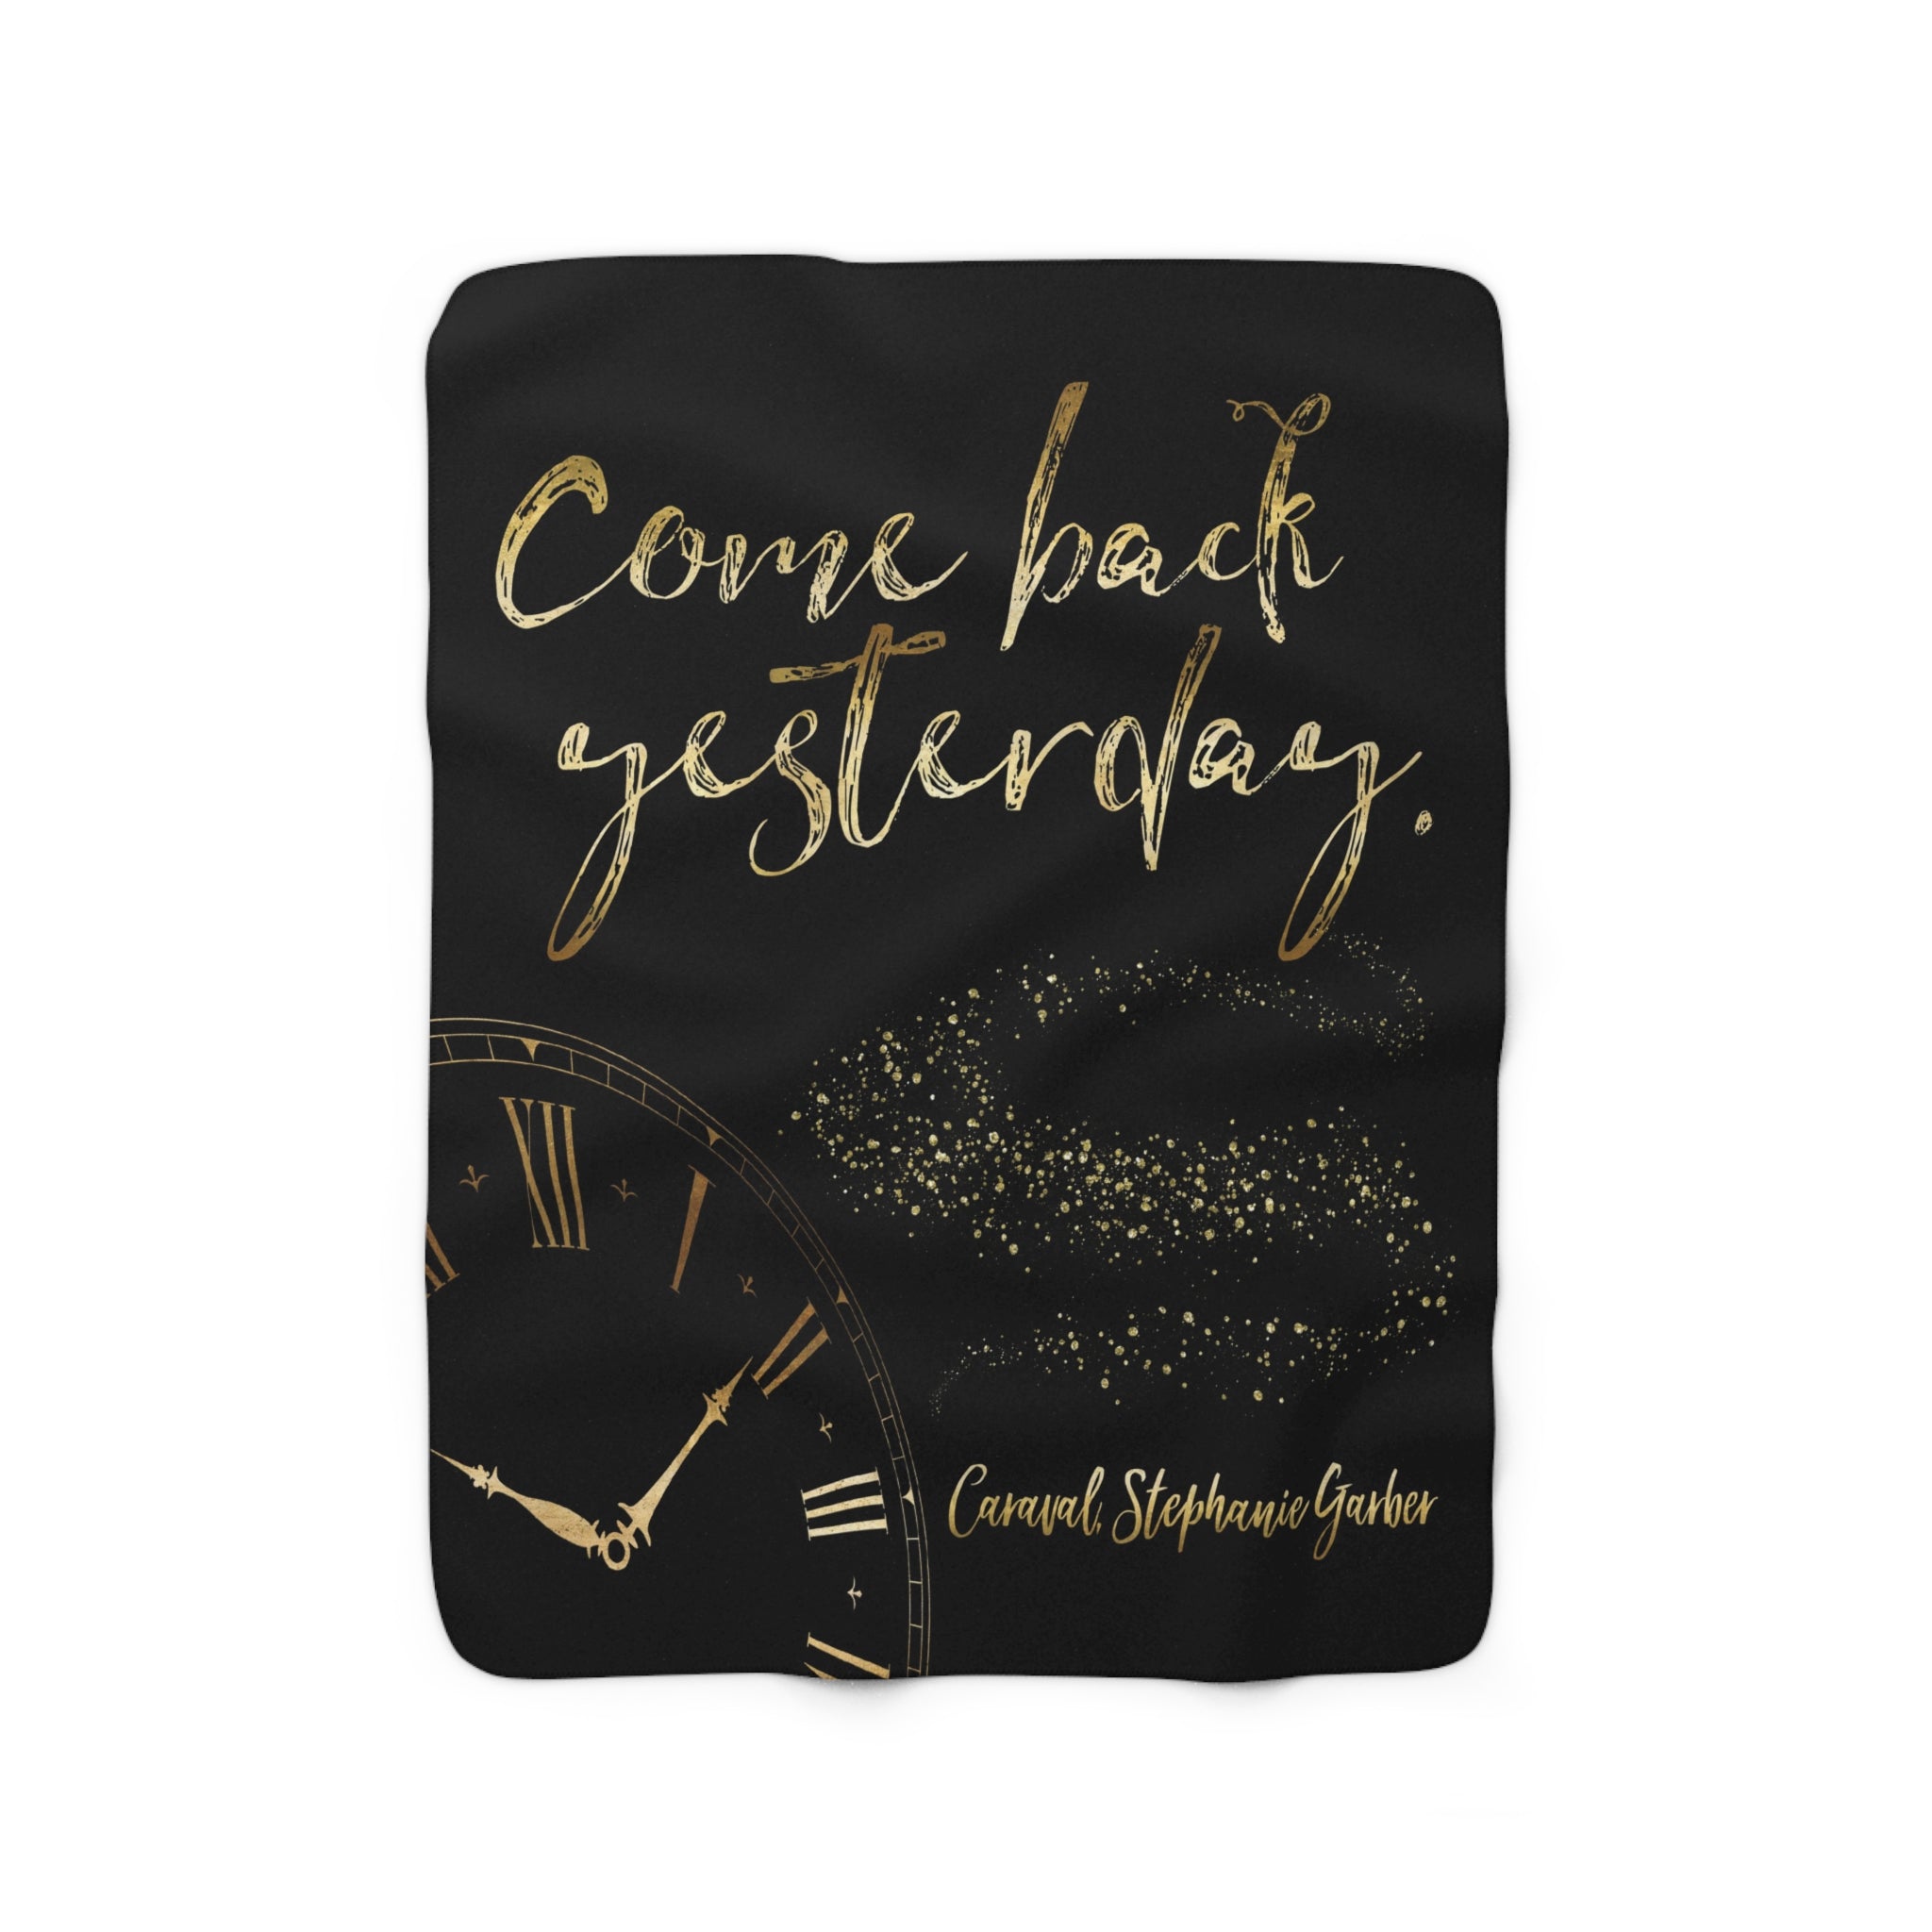 Come back yesterday. Caraval Throw Blanket